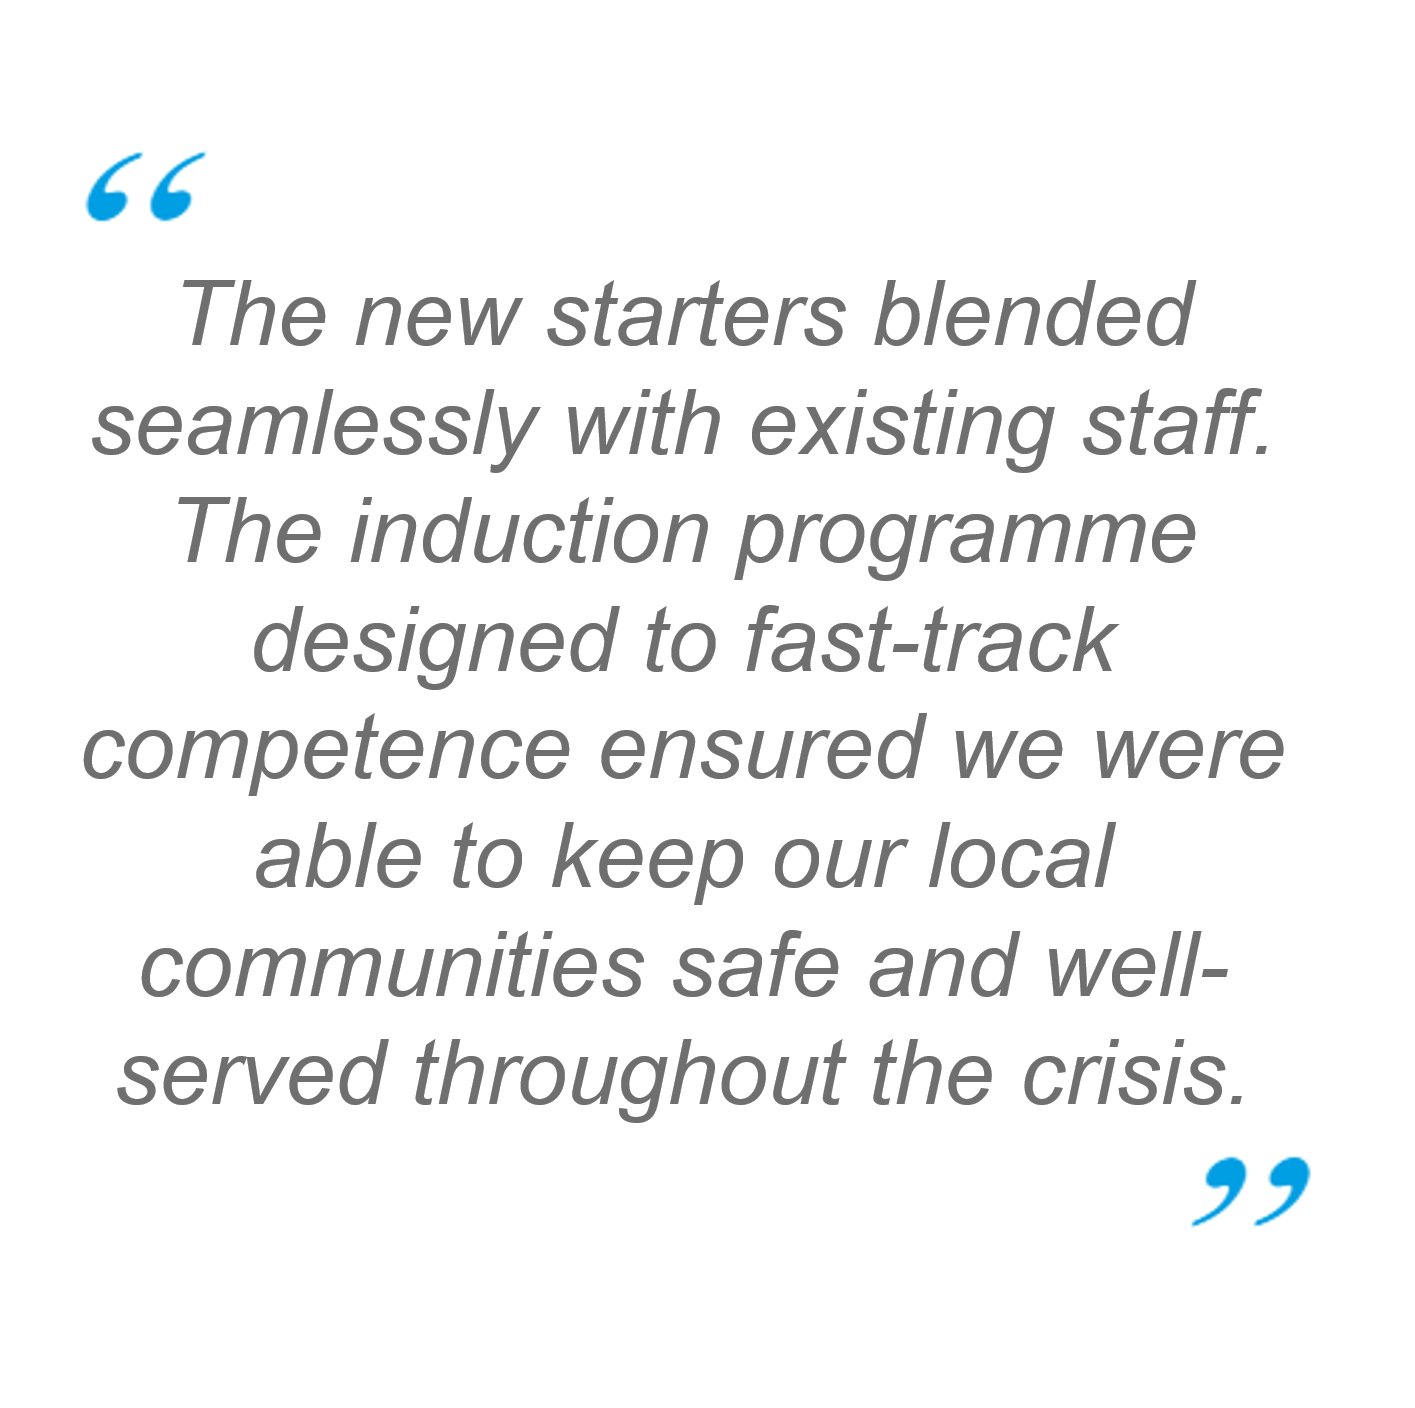 Quote from co-op operational lead: The new starters blended seamlessly with existing staff. The induction programme designed to fast-track competence ensured we were able to keep our local communities safe and well-served throughout the crisis